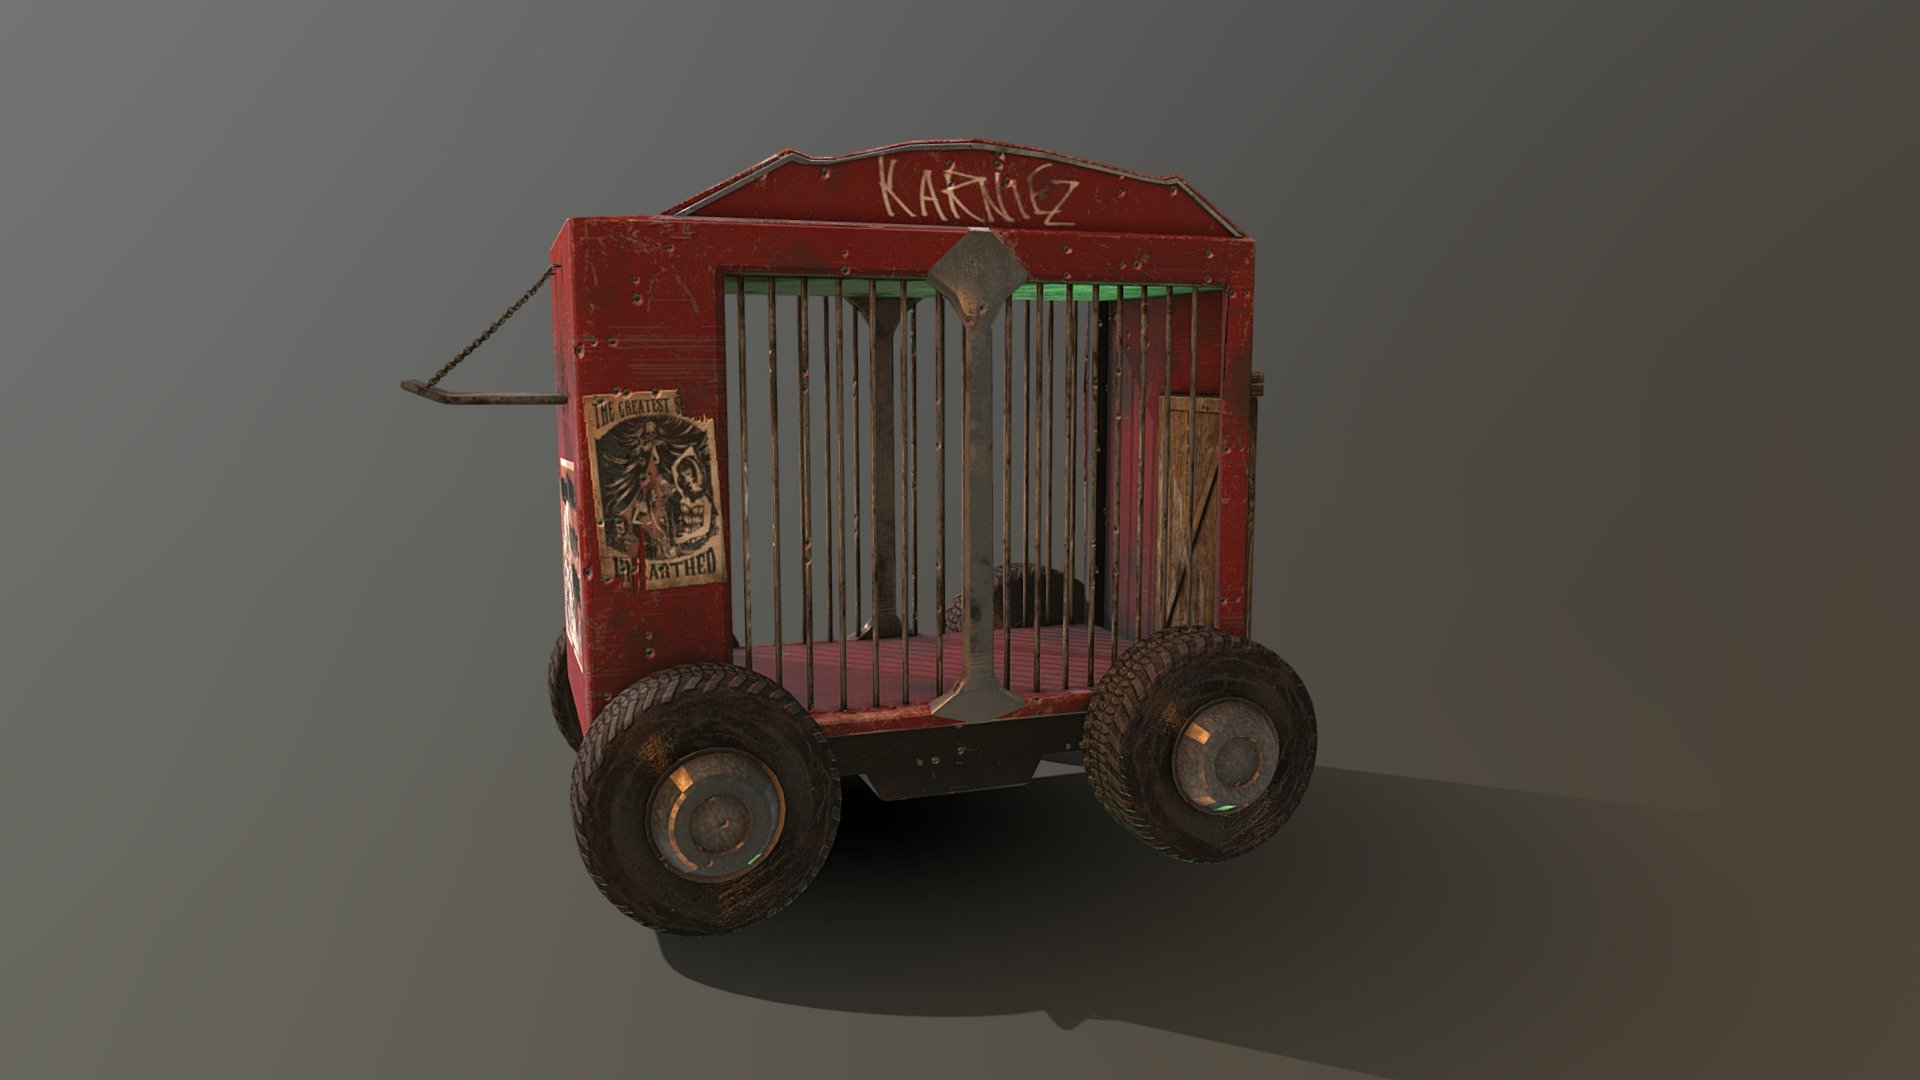 An old circus wagon repurposed by the killer clown gang, the Karniez. Combat is a guarantee whenever they venture out; their wagon has a long history, but despite being riddled with bullet holes and the engine being operated by a crank, the Karniez wagon is very sturdy.

Model and UVs in Maya, texture in Substance Painter with open source posters and alphas drawn in Clip Studio Paint 3d model